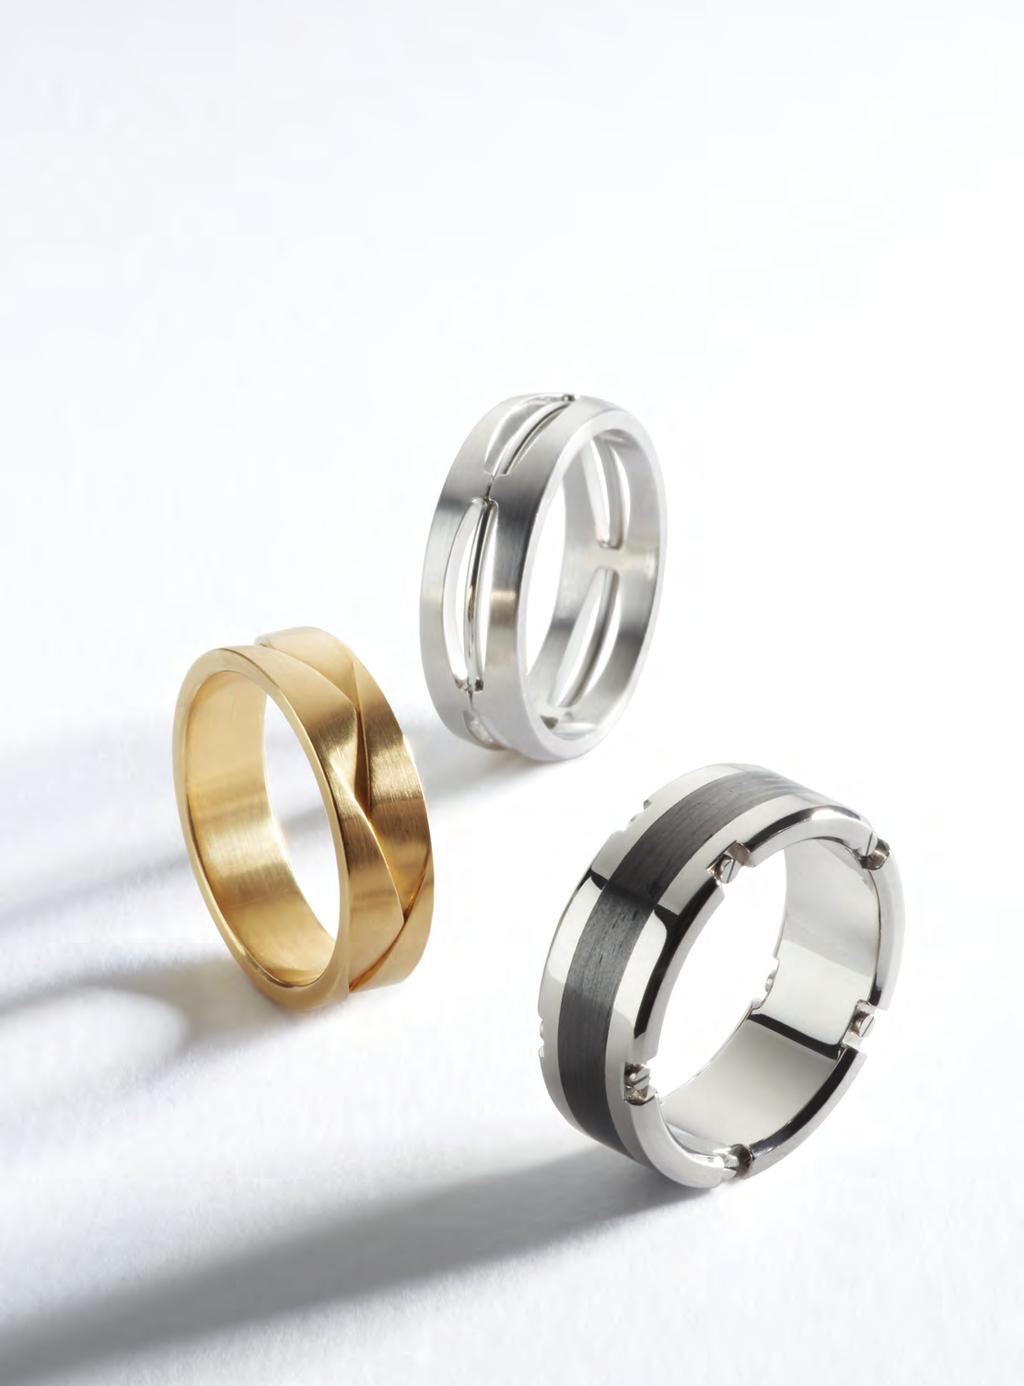 Furrer-Jacot is an award-winning manufacturer of fine Swiss wedding bands and engagement rings.